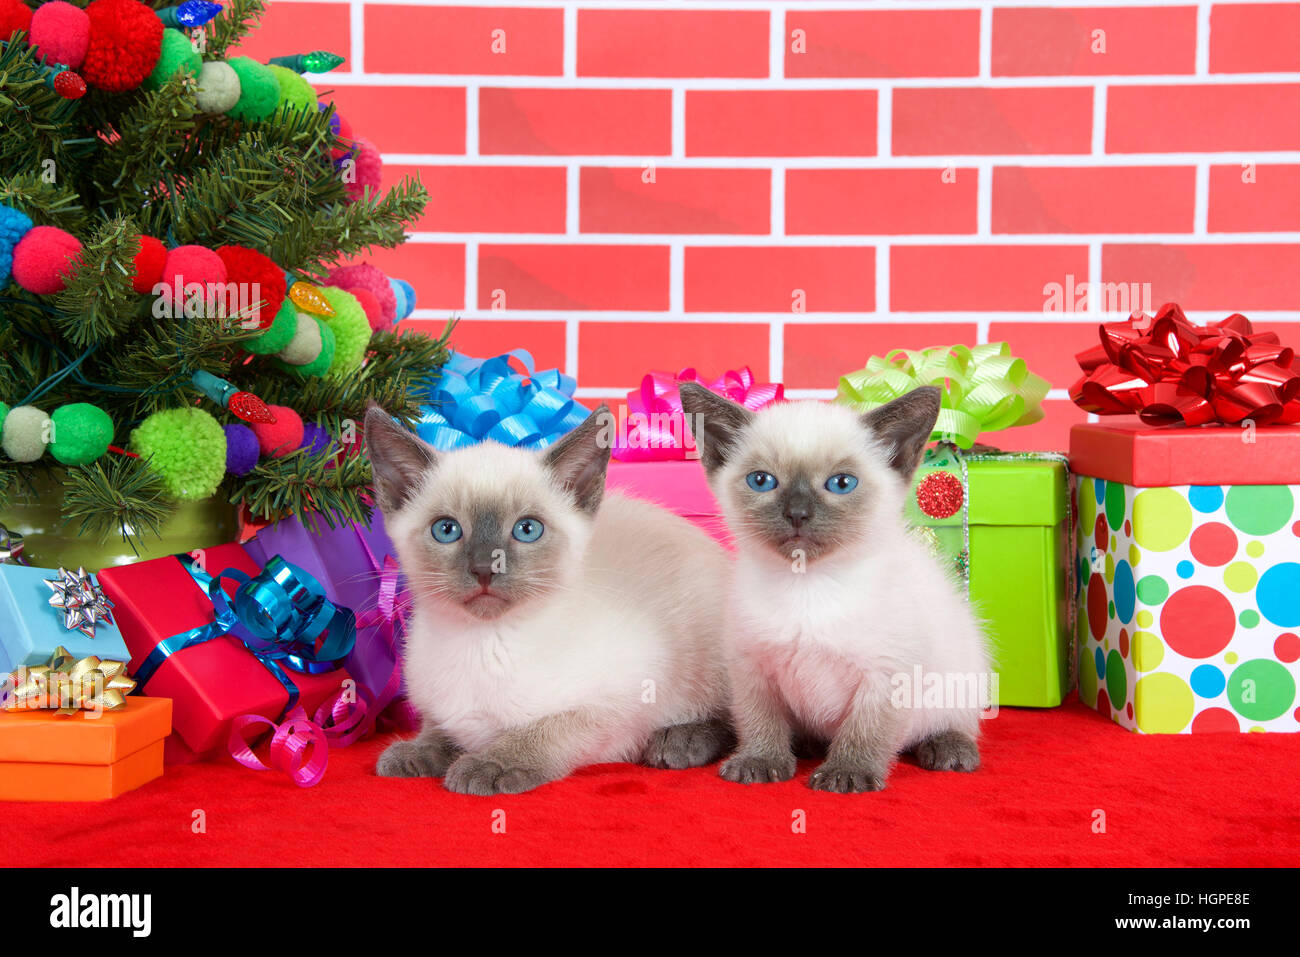 Two Siamese kittens siblings, one laying one sitting on red fur carpet by christmas tree, decorated with yarn balls and lights, with presents around t Stock Photo